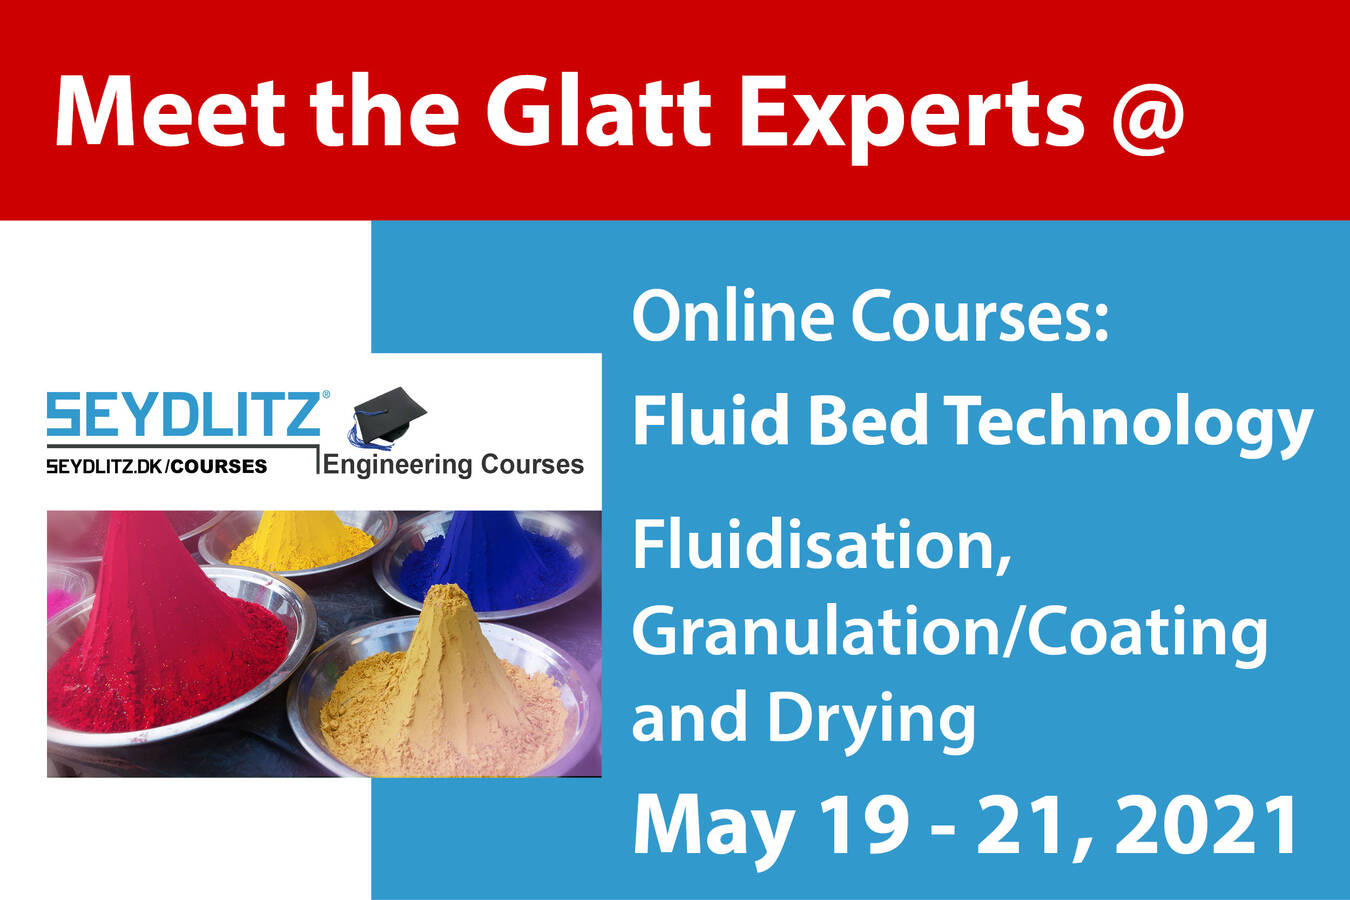 Seydlitz Online course, May 19 - 21, 2021